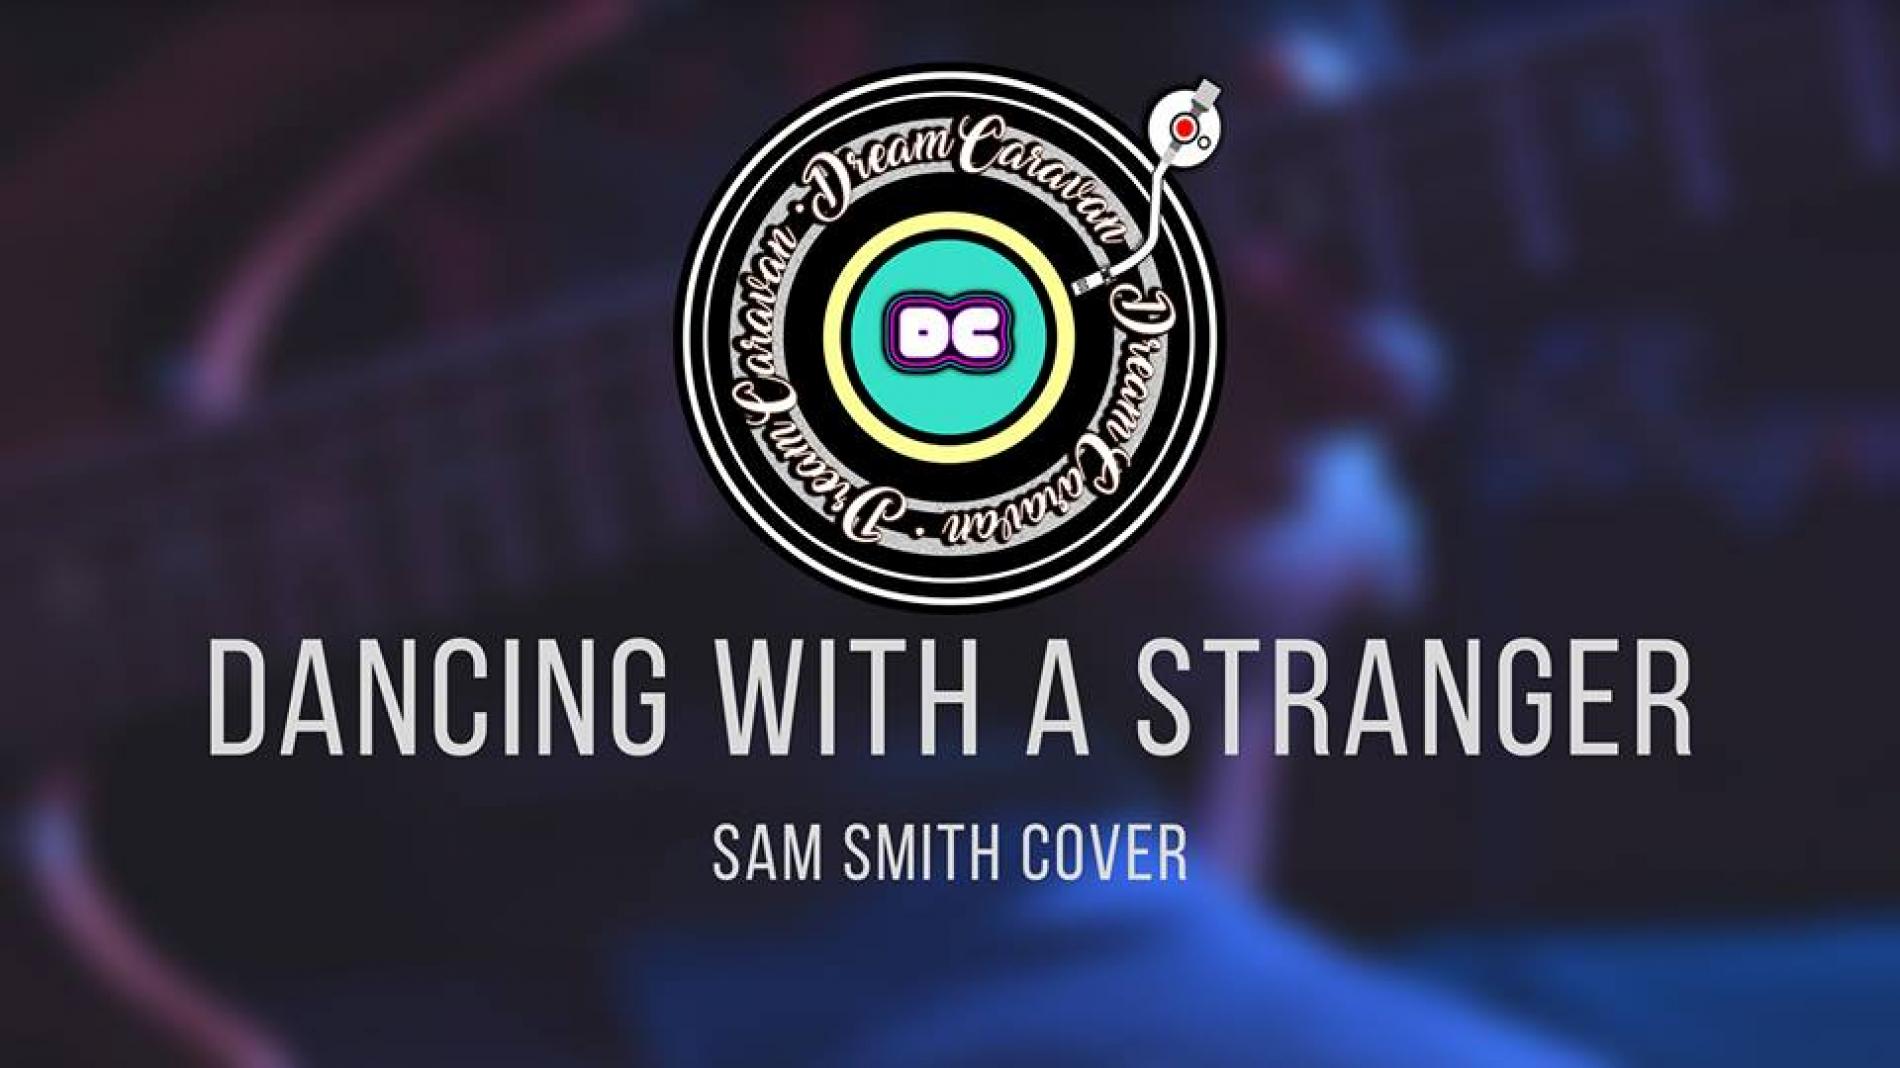 Dream Caravan – Dancing With A Stranger (Sam Smith Acoustic Cover)